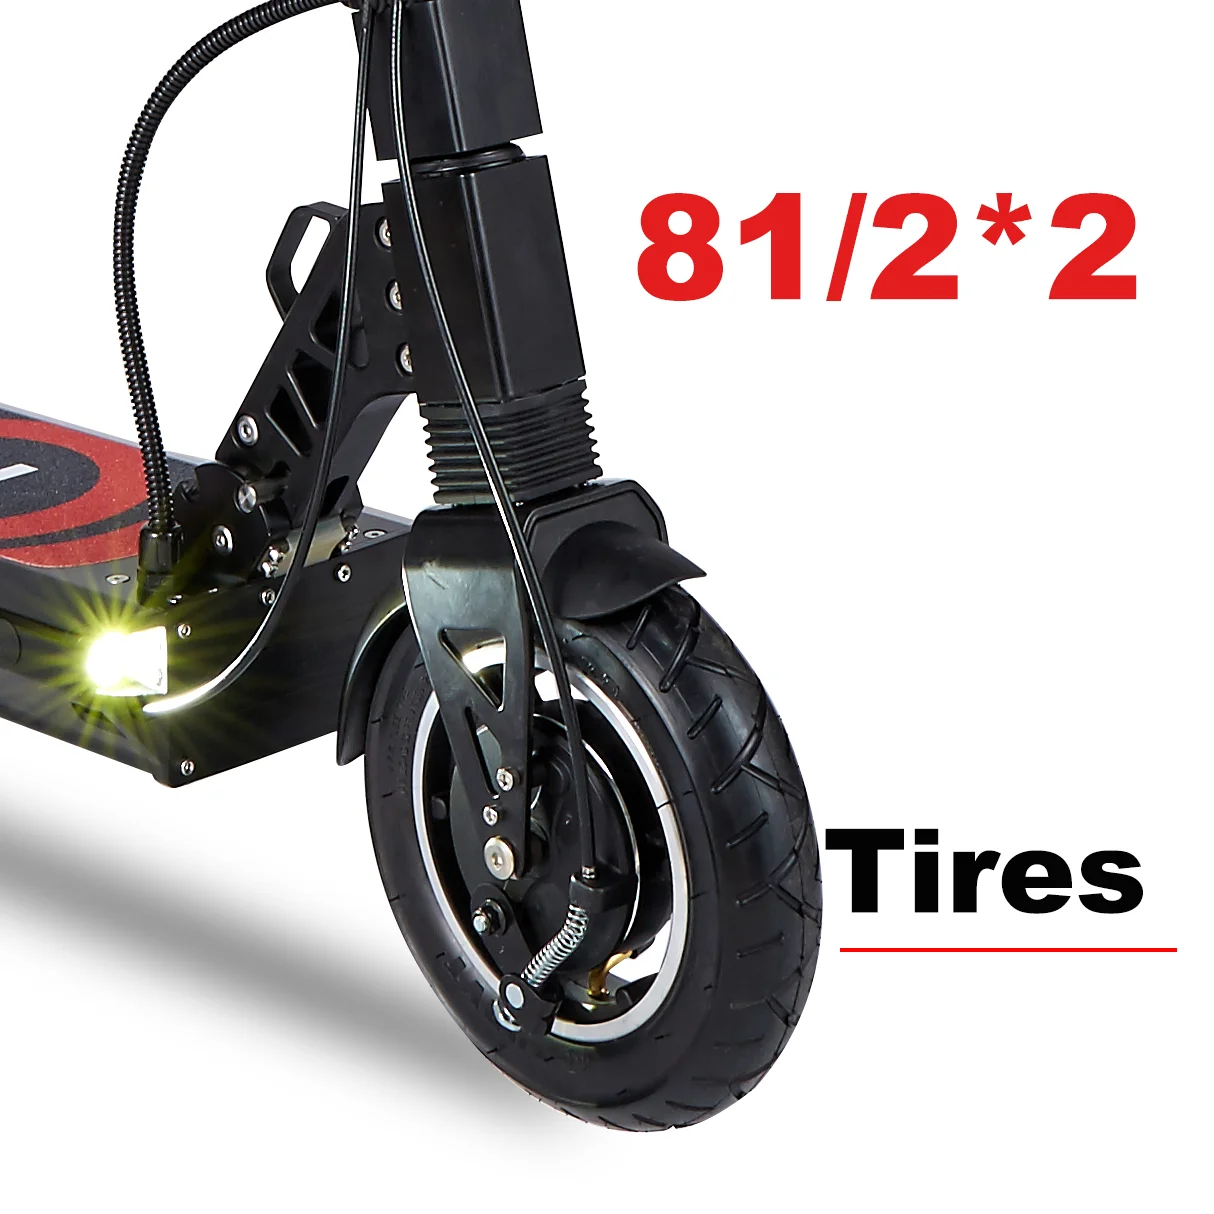 

Universal 8.5 Inch City Road Pneumatic Tire for HERO S9 Electric Scooter 81/2*2 (Front and Rear)